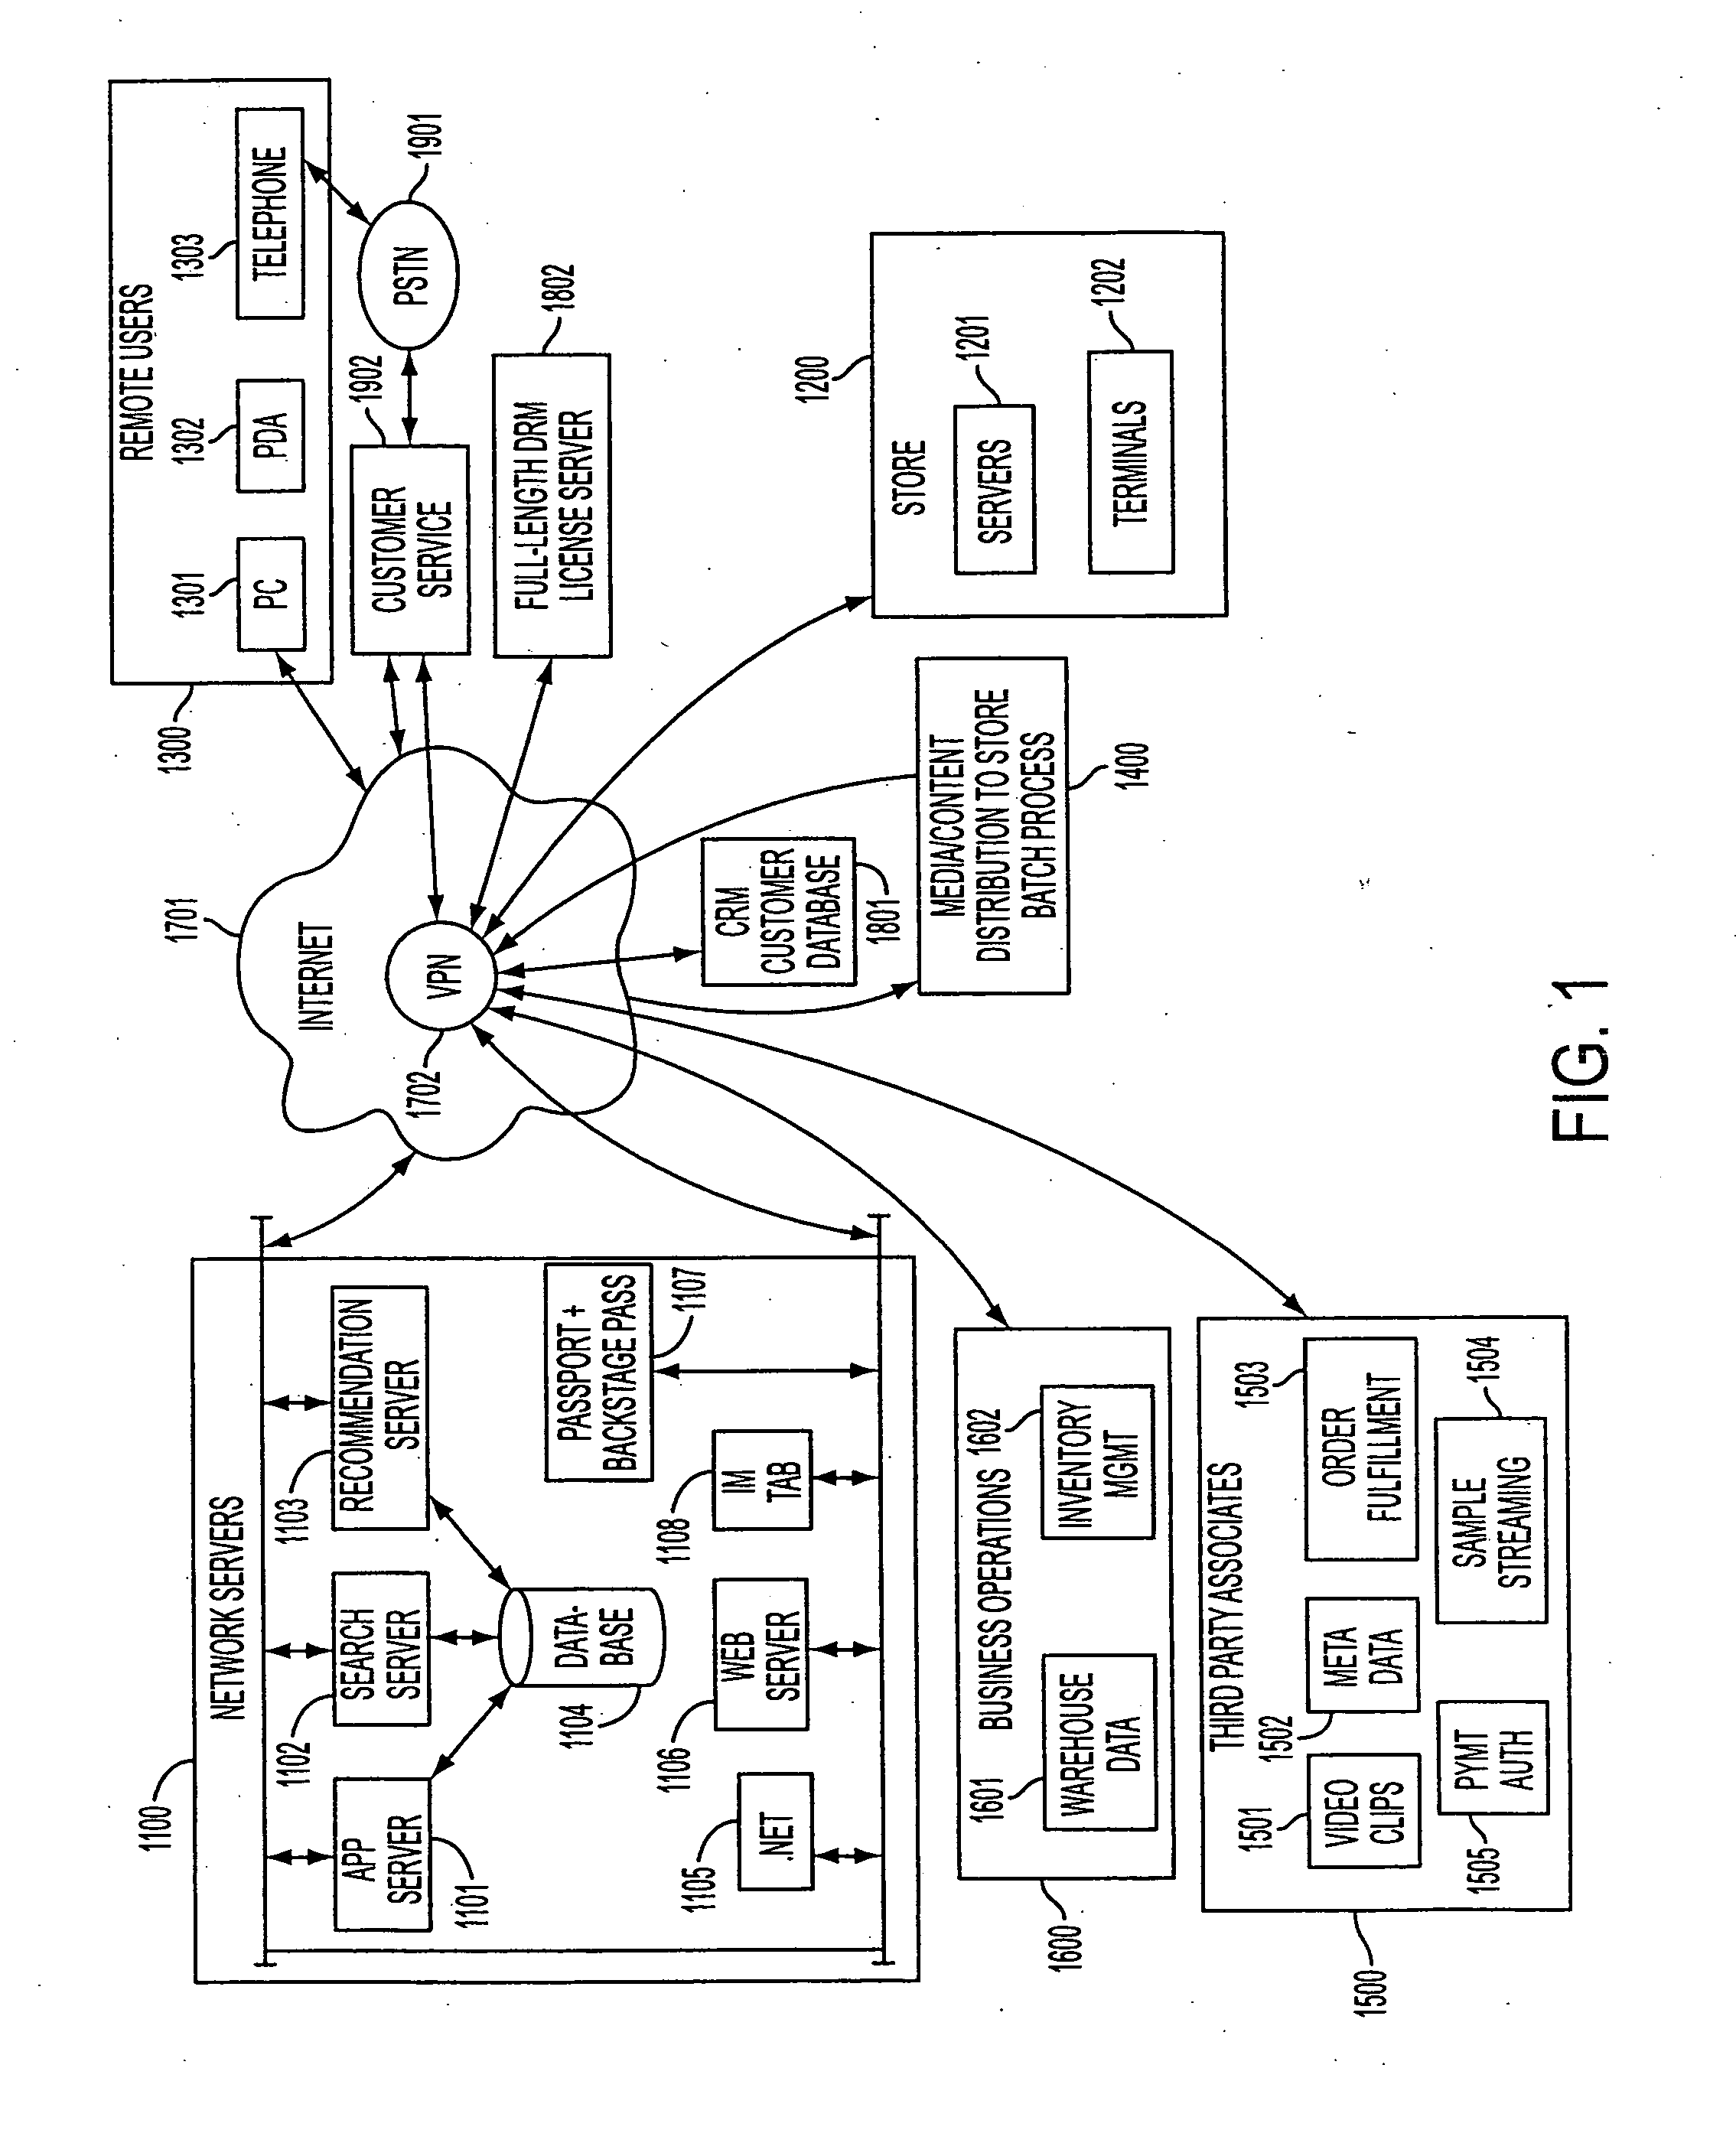 User-personalized media sampling, recommendation and purchasing system using real-time inventory database